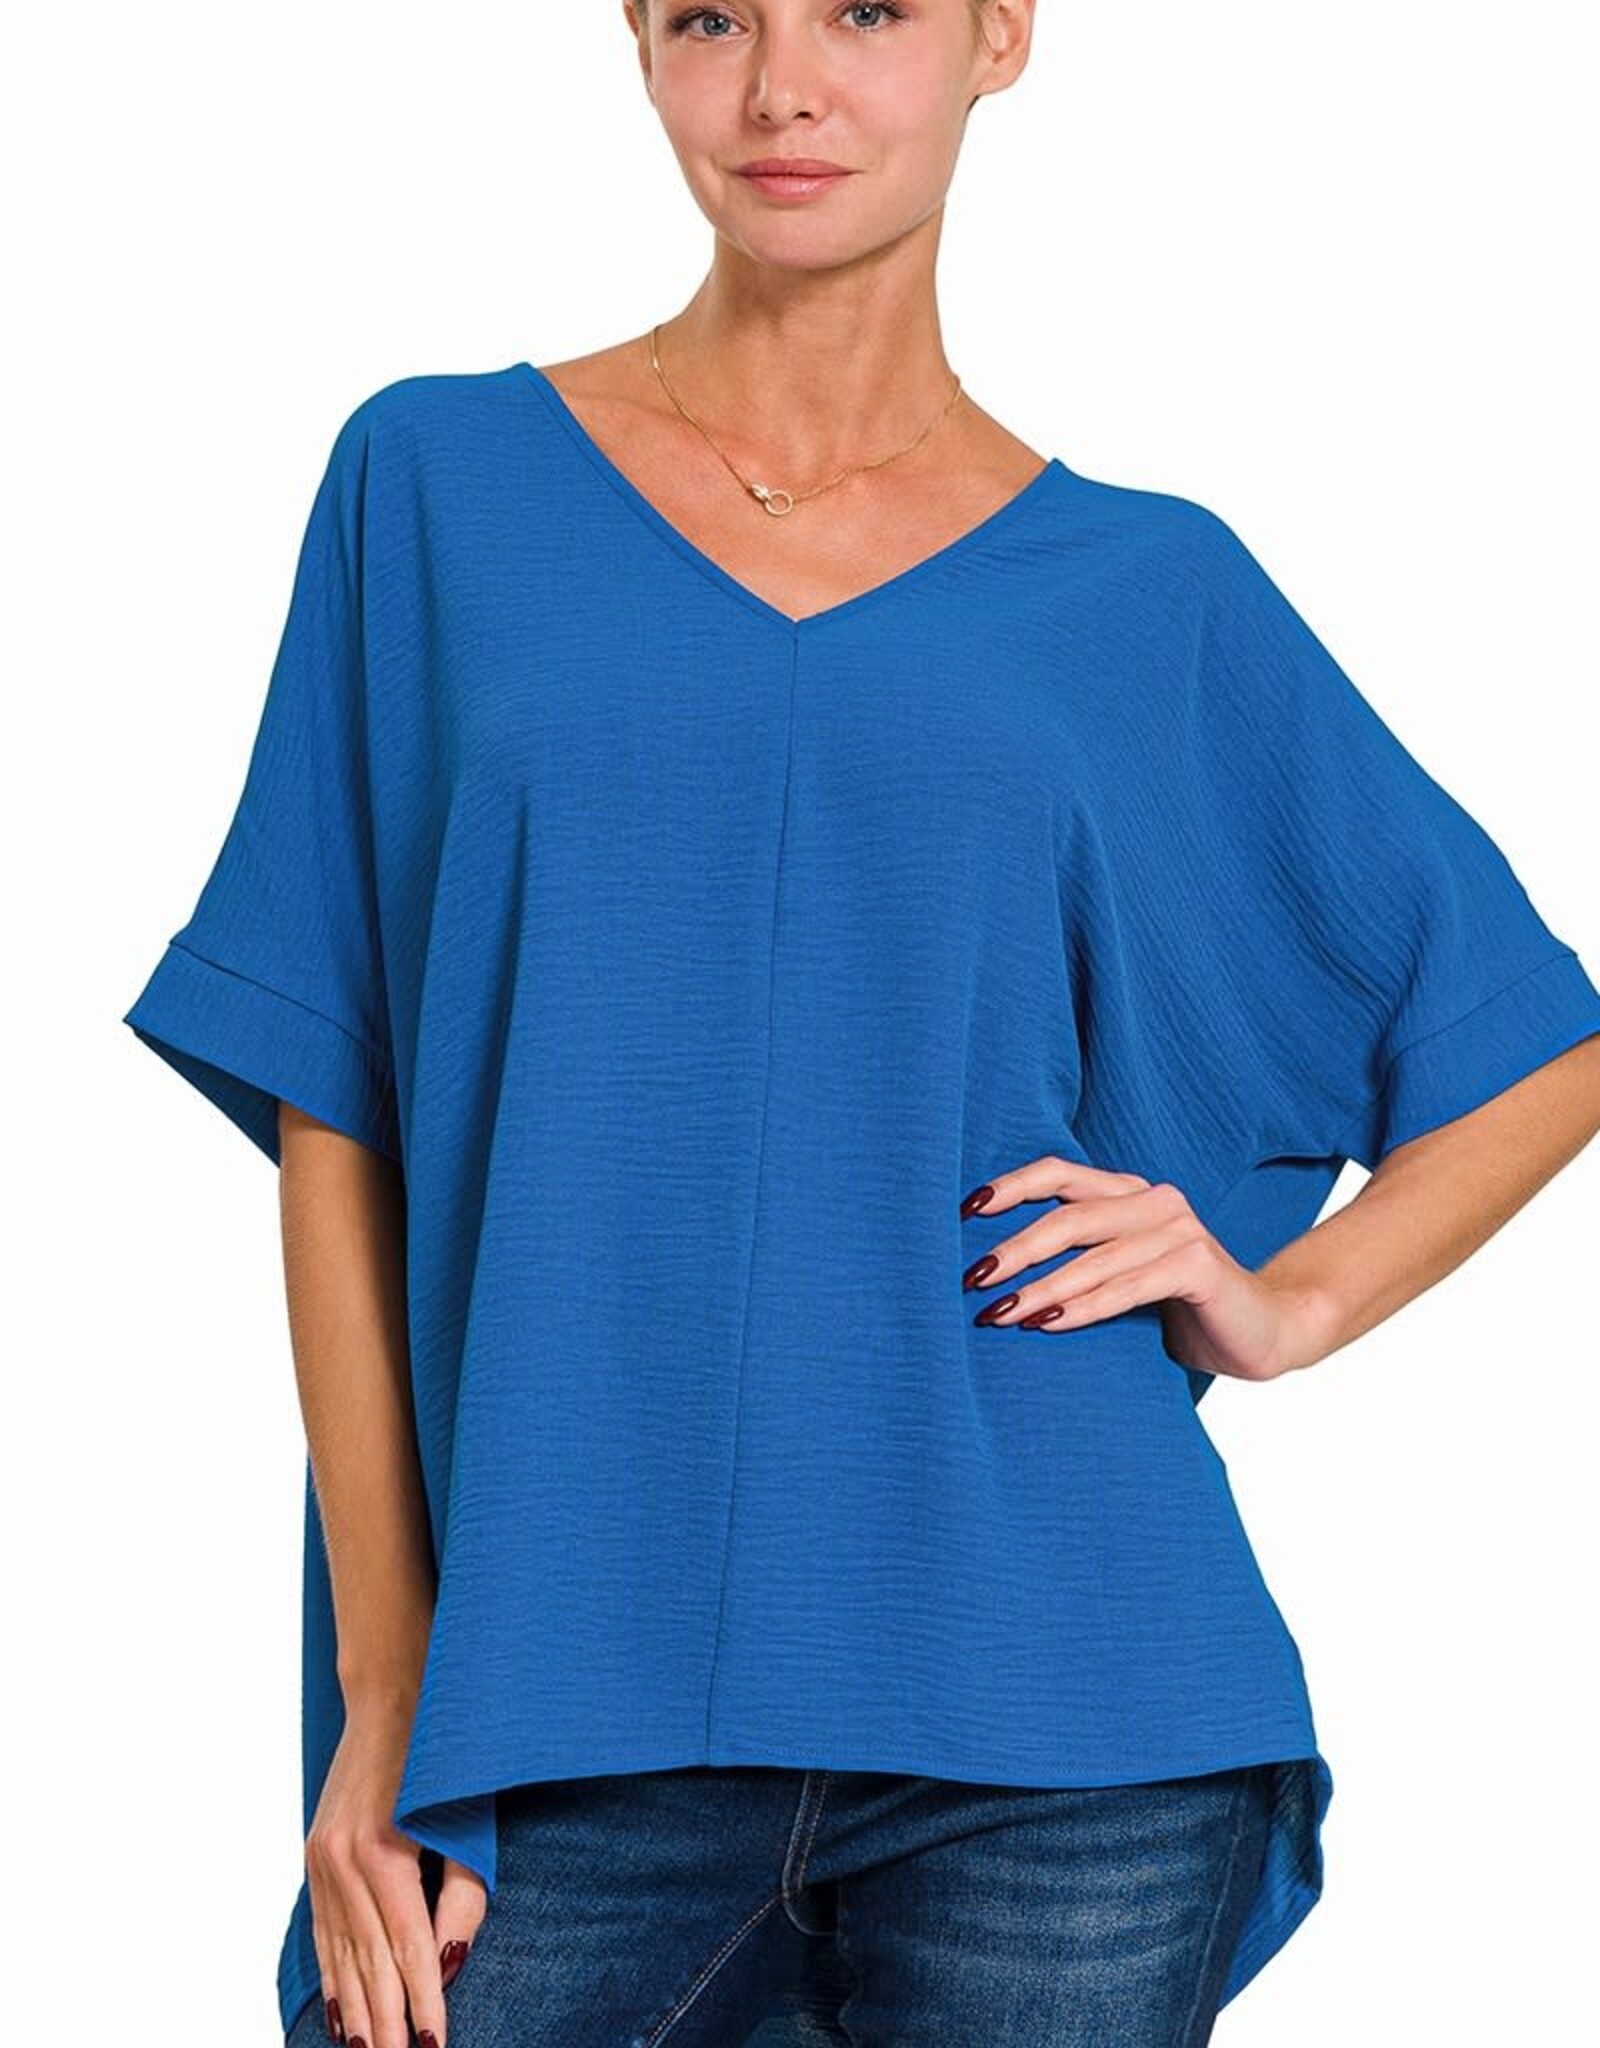 Miss Bliss Woven Airflow V Neck Doman Top